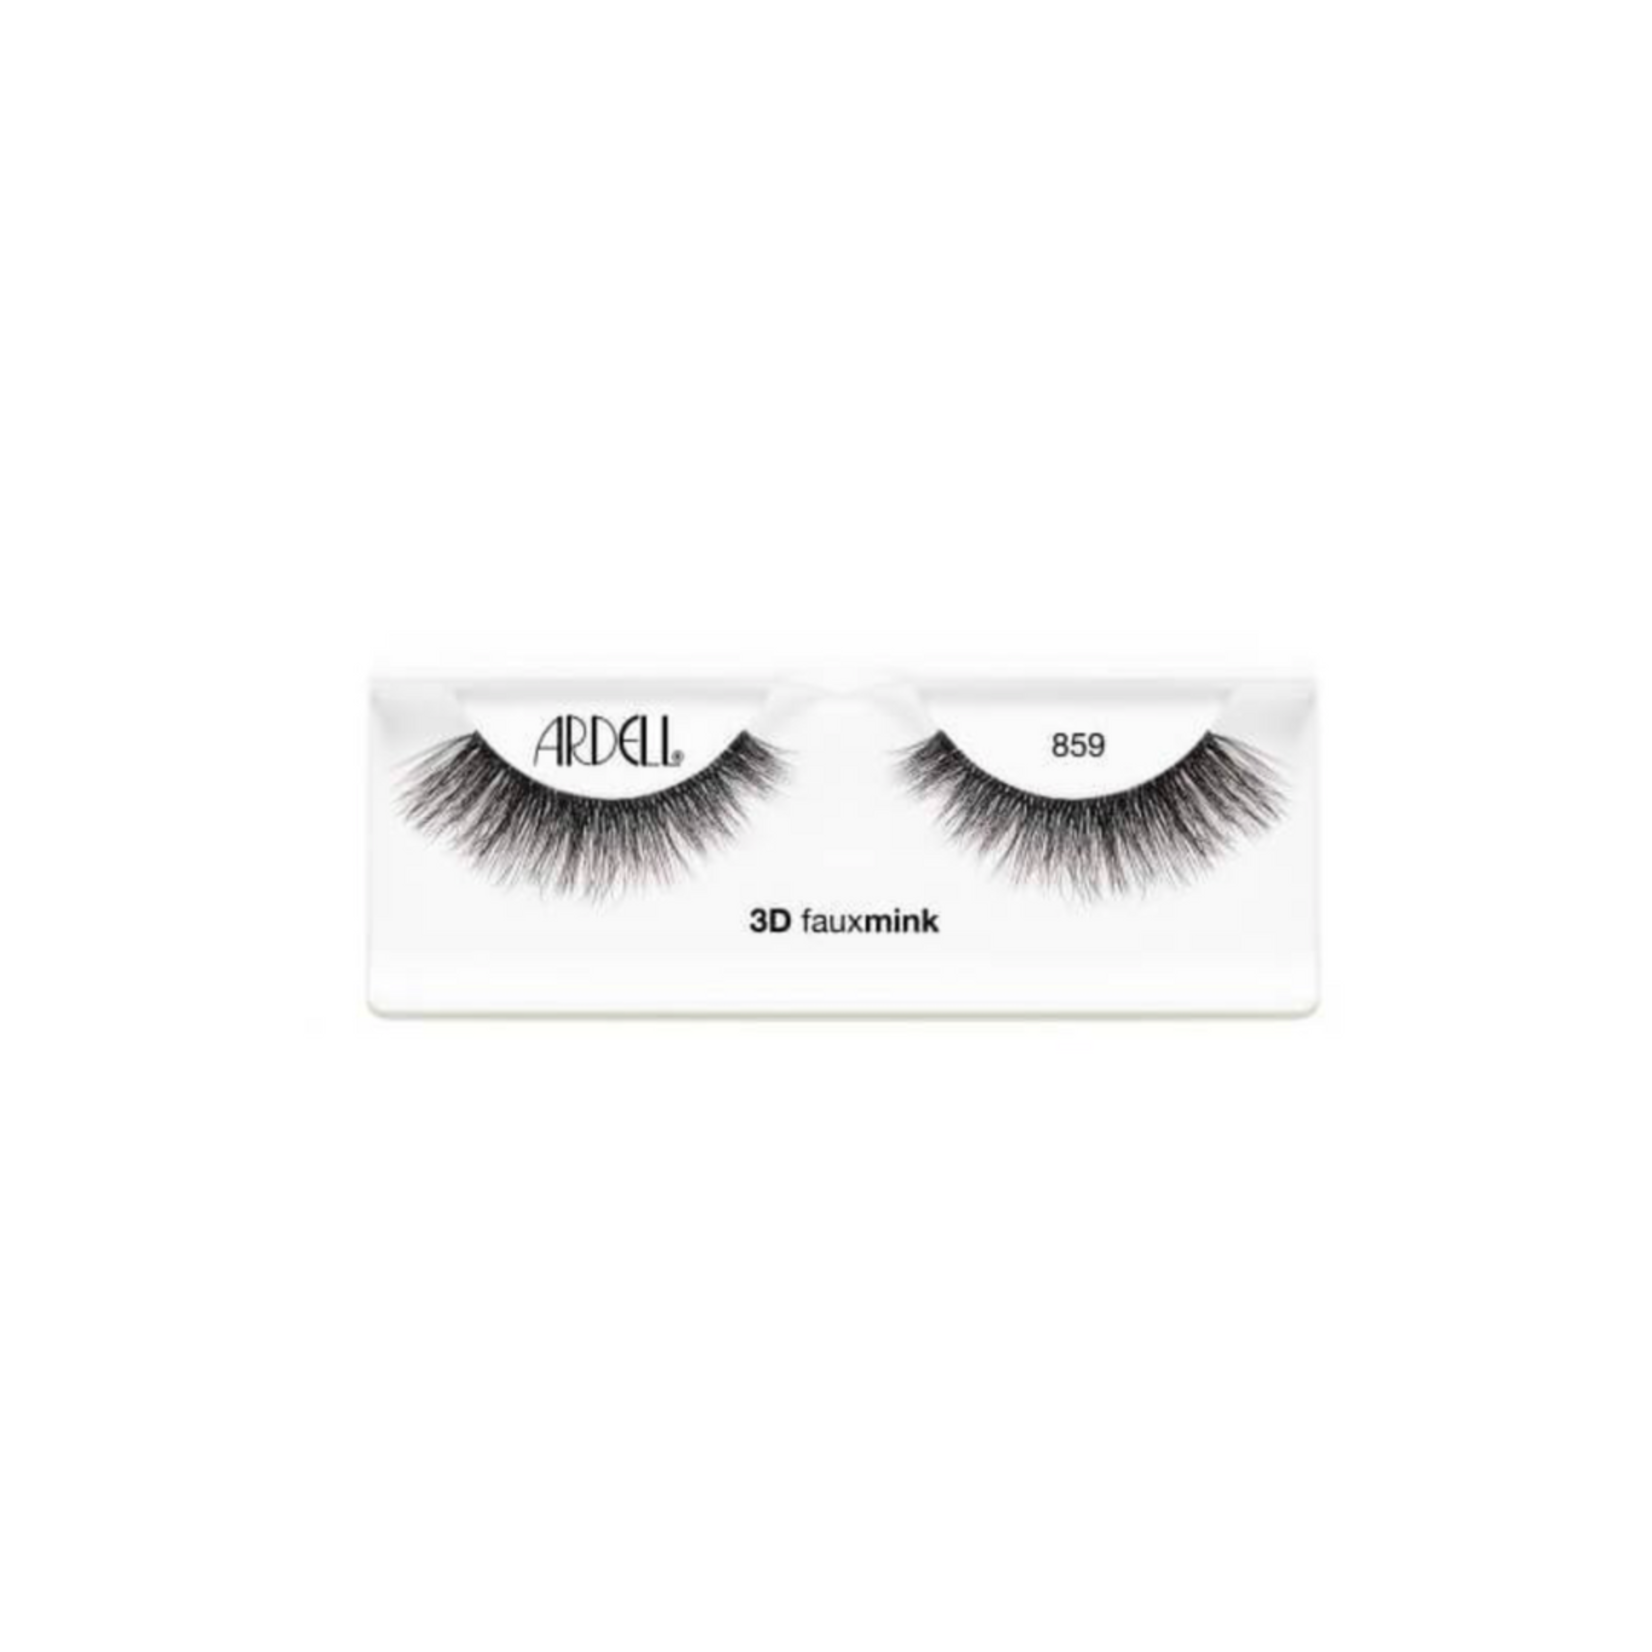 Ardell Ardell Professional 3D Fauxmink 859 Lashes